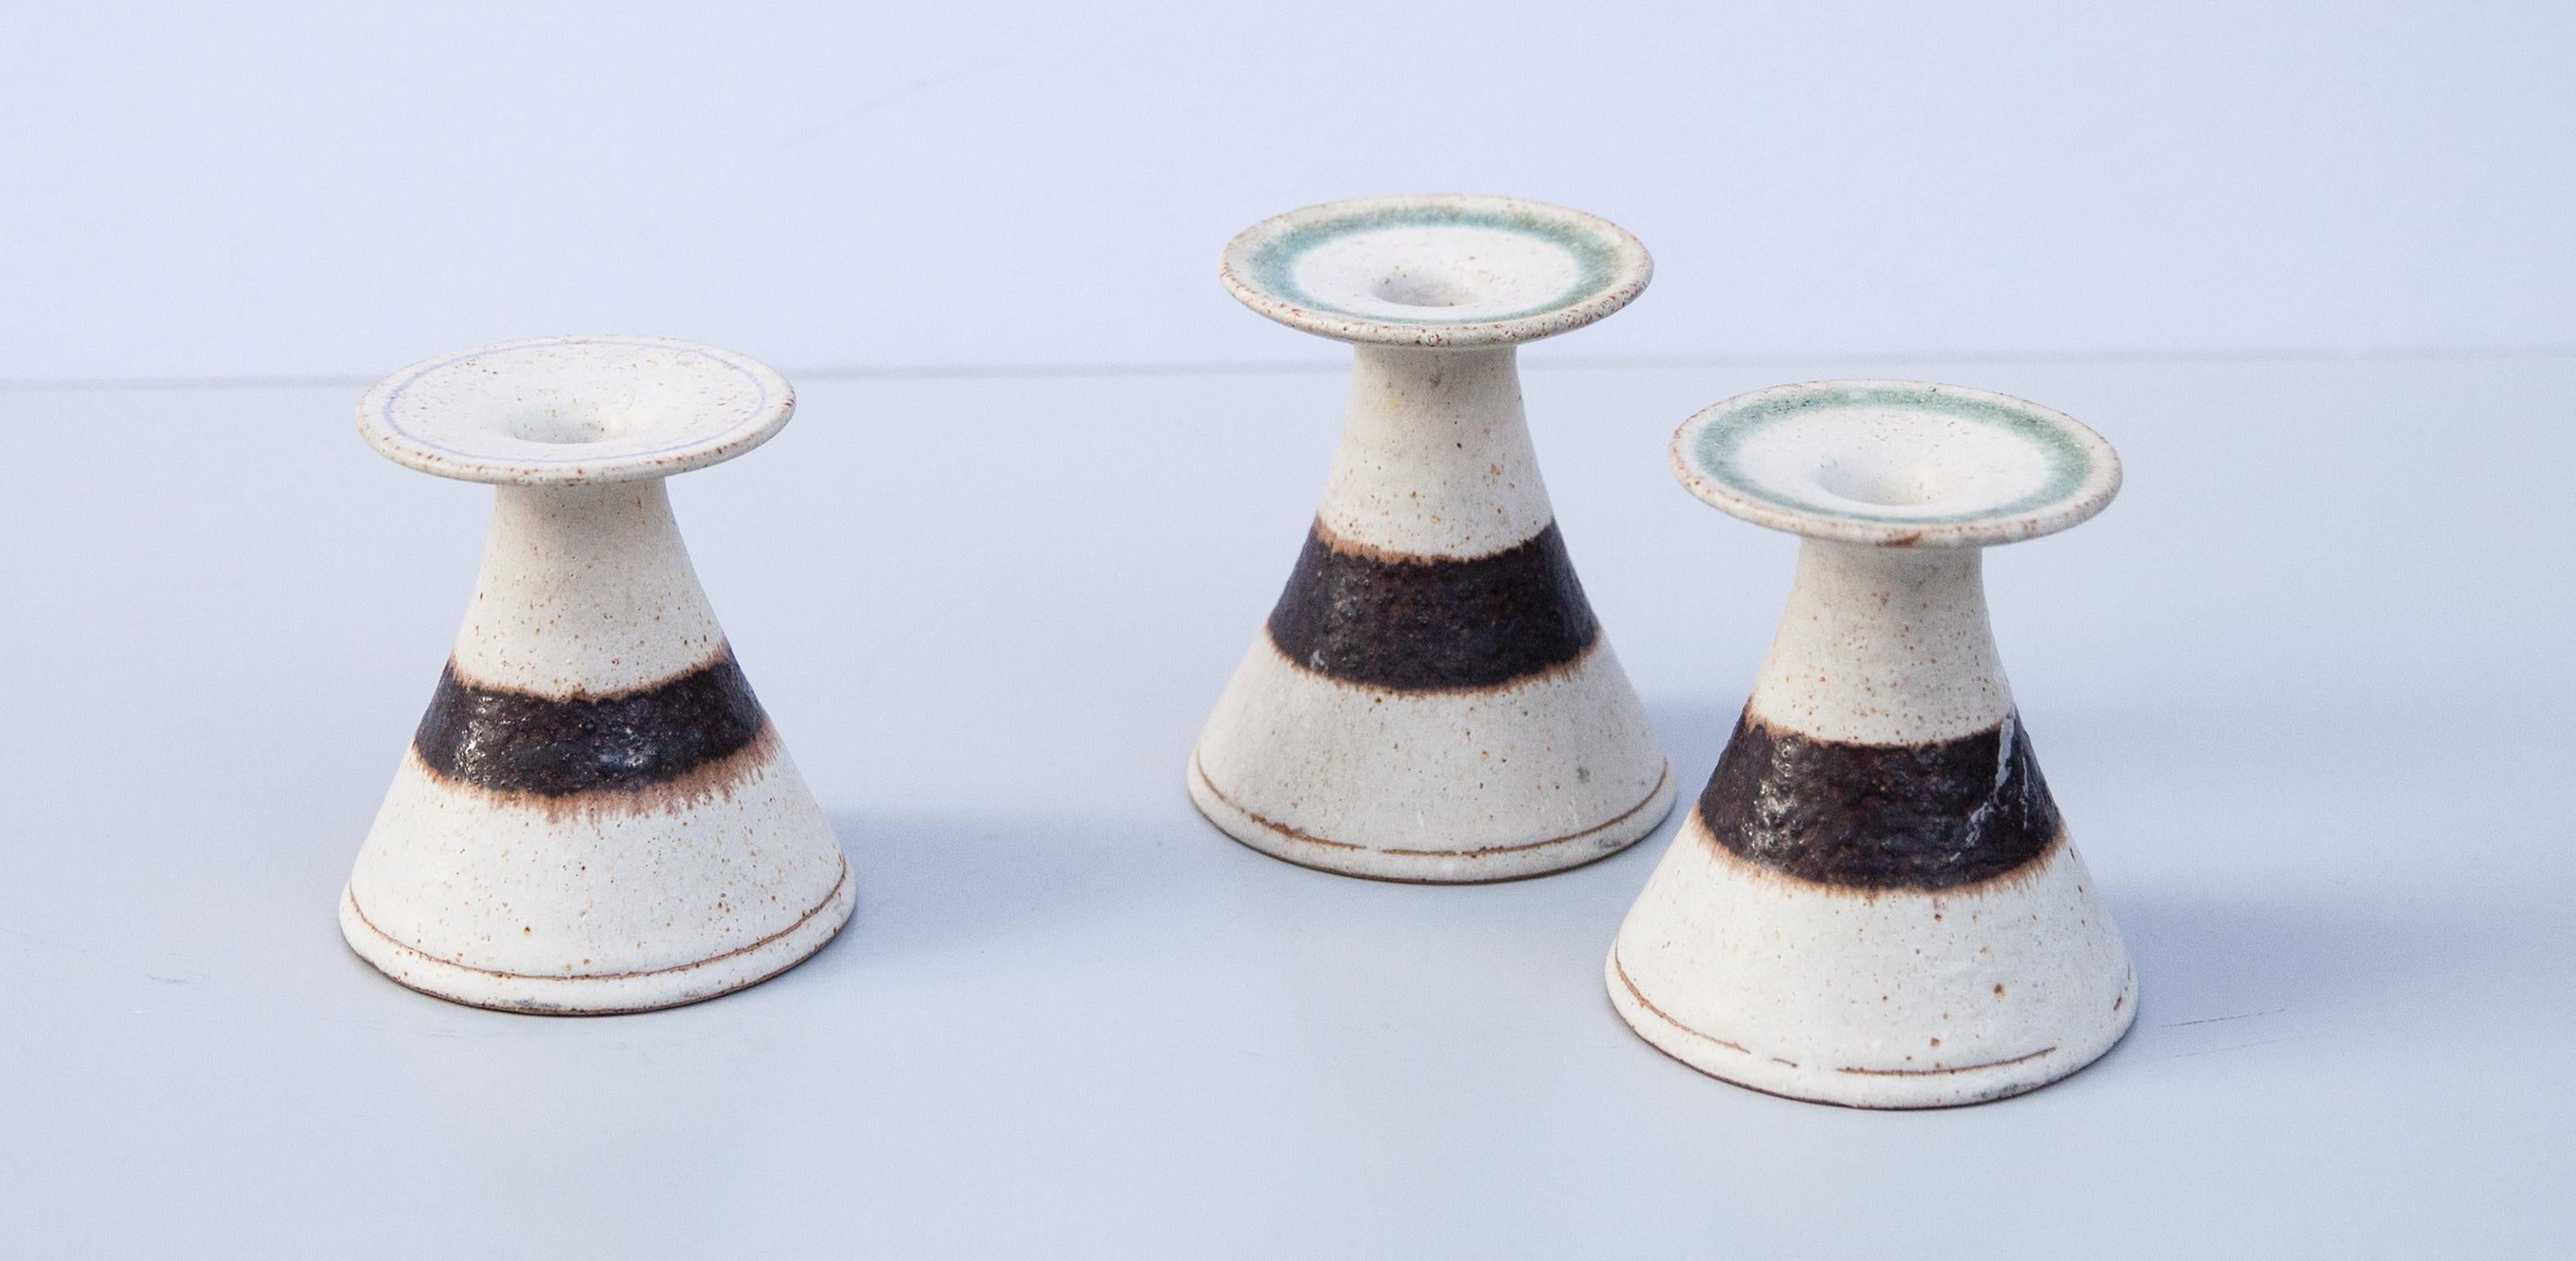 Wonderful candle sticks in greige stoneware with one brown stripe made by Bruno Gambone in the 1980s. Signed Gambone.
10.5 H x 12 D cm.